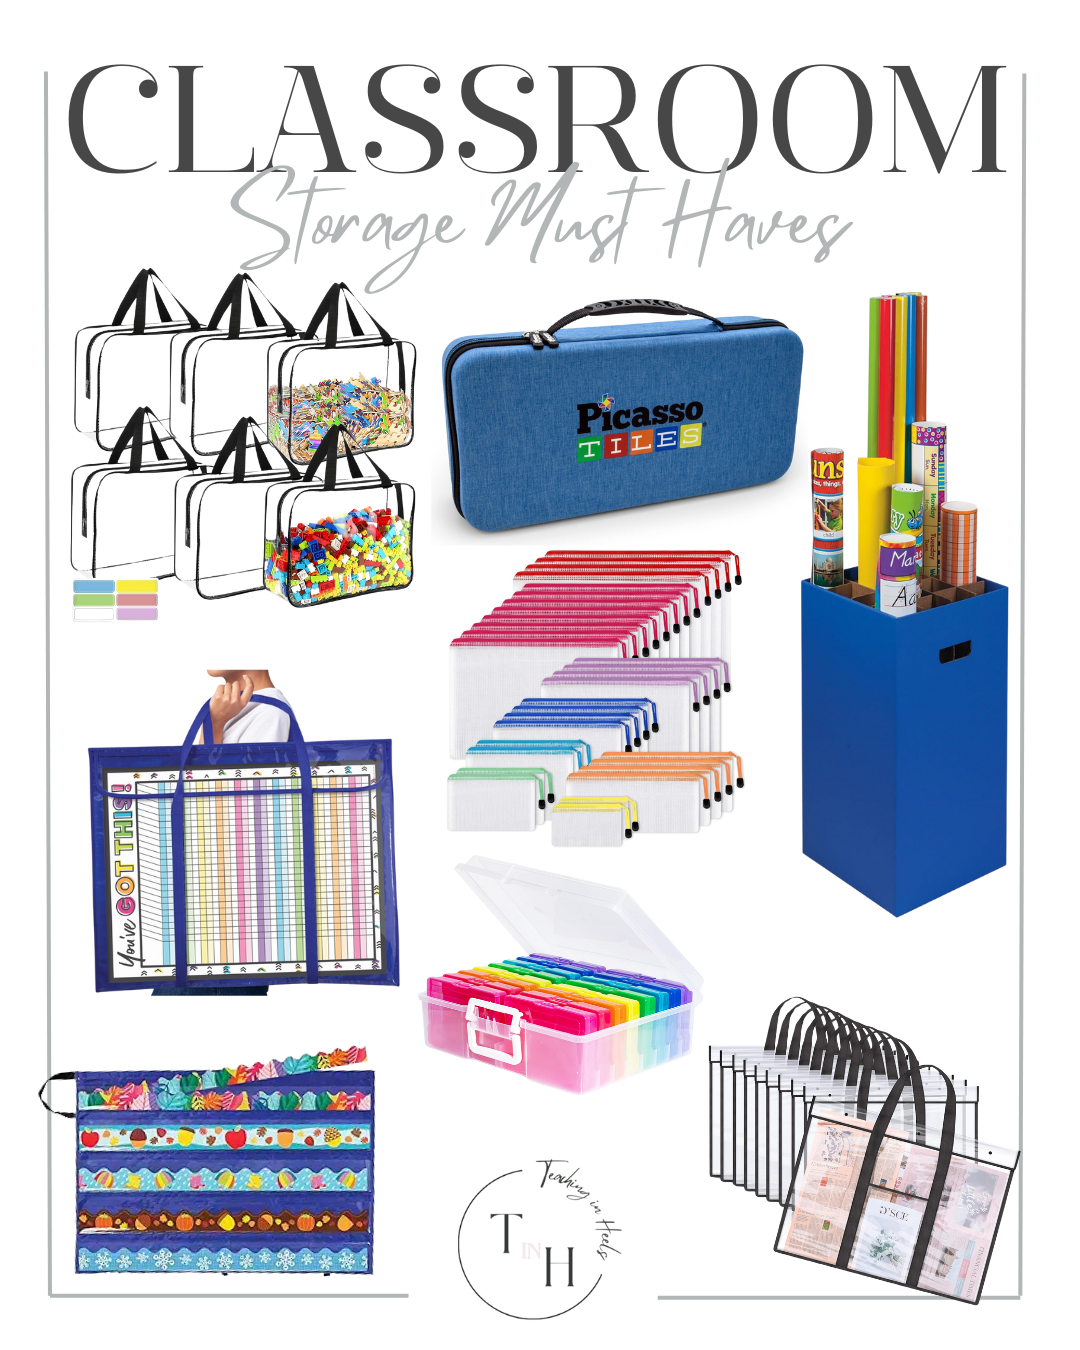 Packing Up Your Classroom: Steps for Stress-Free End-of-Year Organization

packing essentials, storage essentials, packing classroom, classroom essentials, teacher, end of year classroom